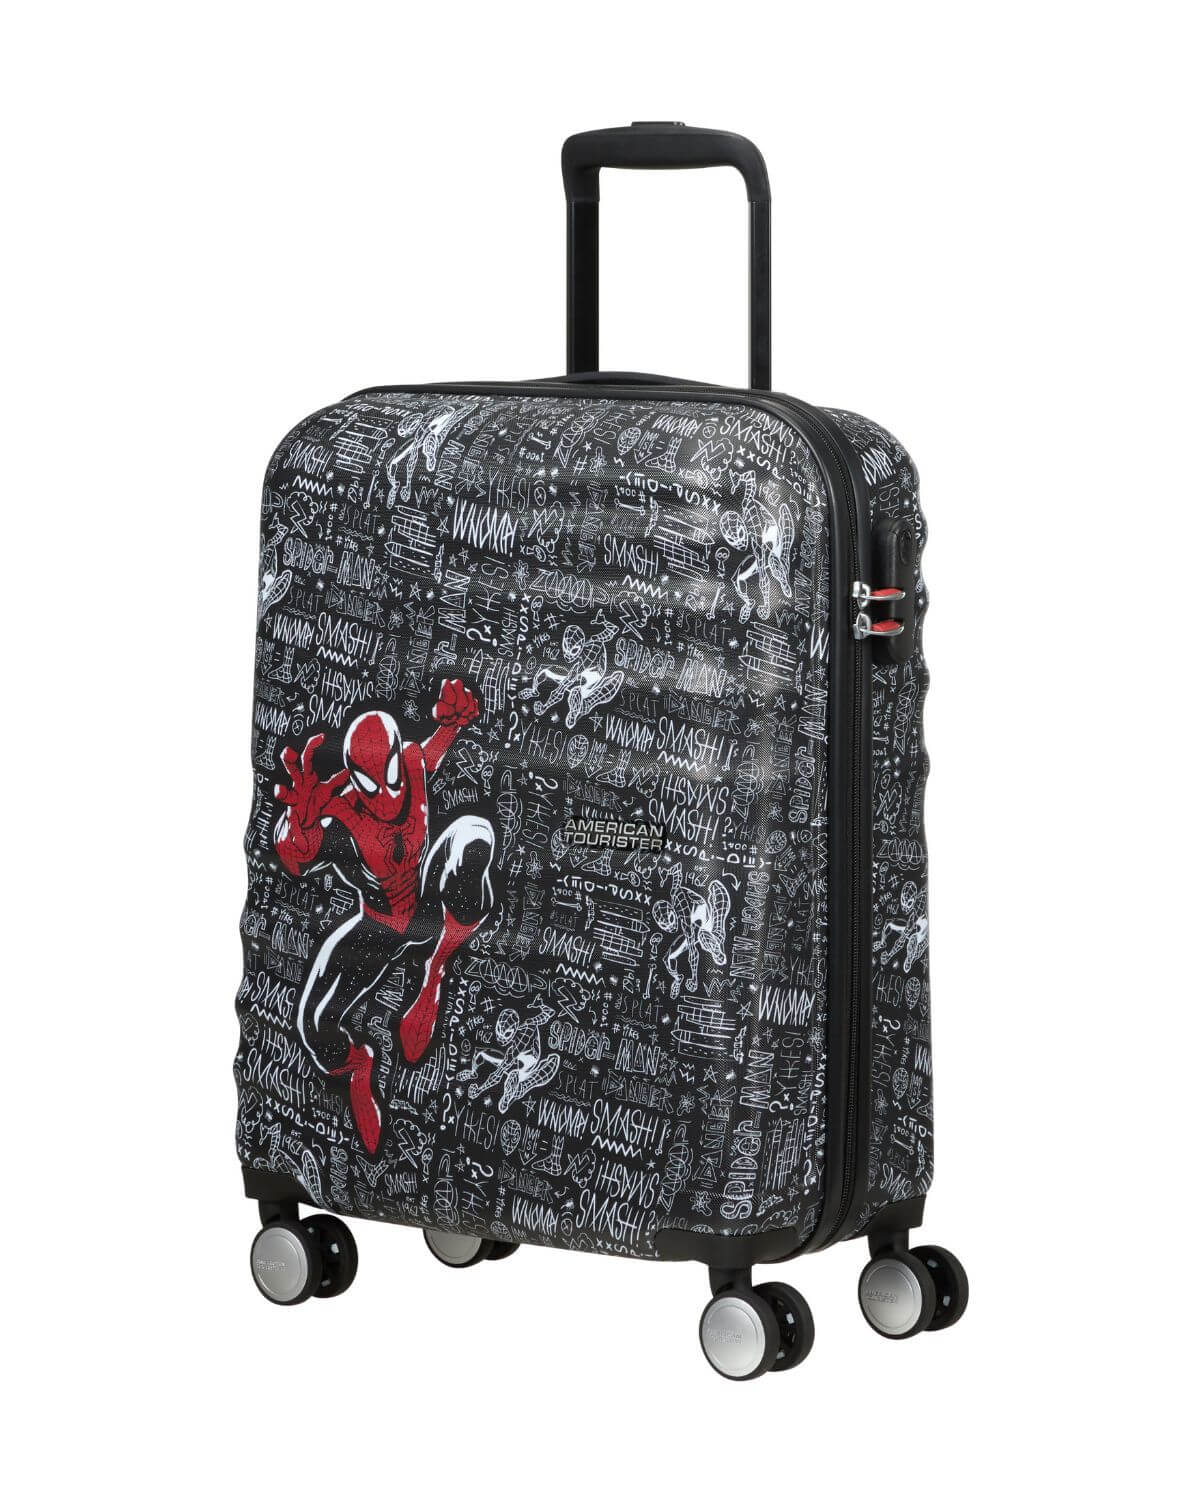 SPINNER AMERICAN TOURISTER SPIDERMAN SKETCH